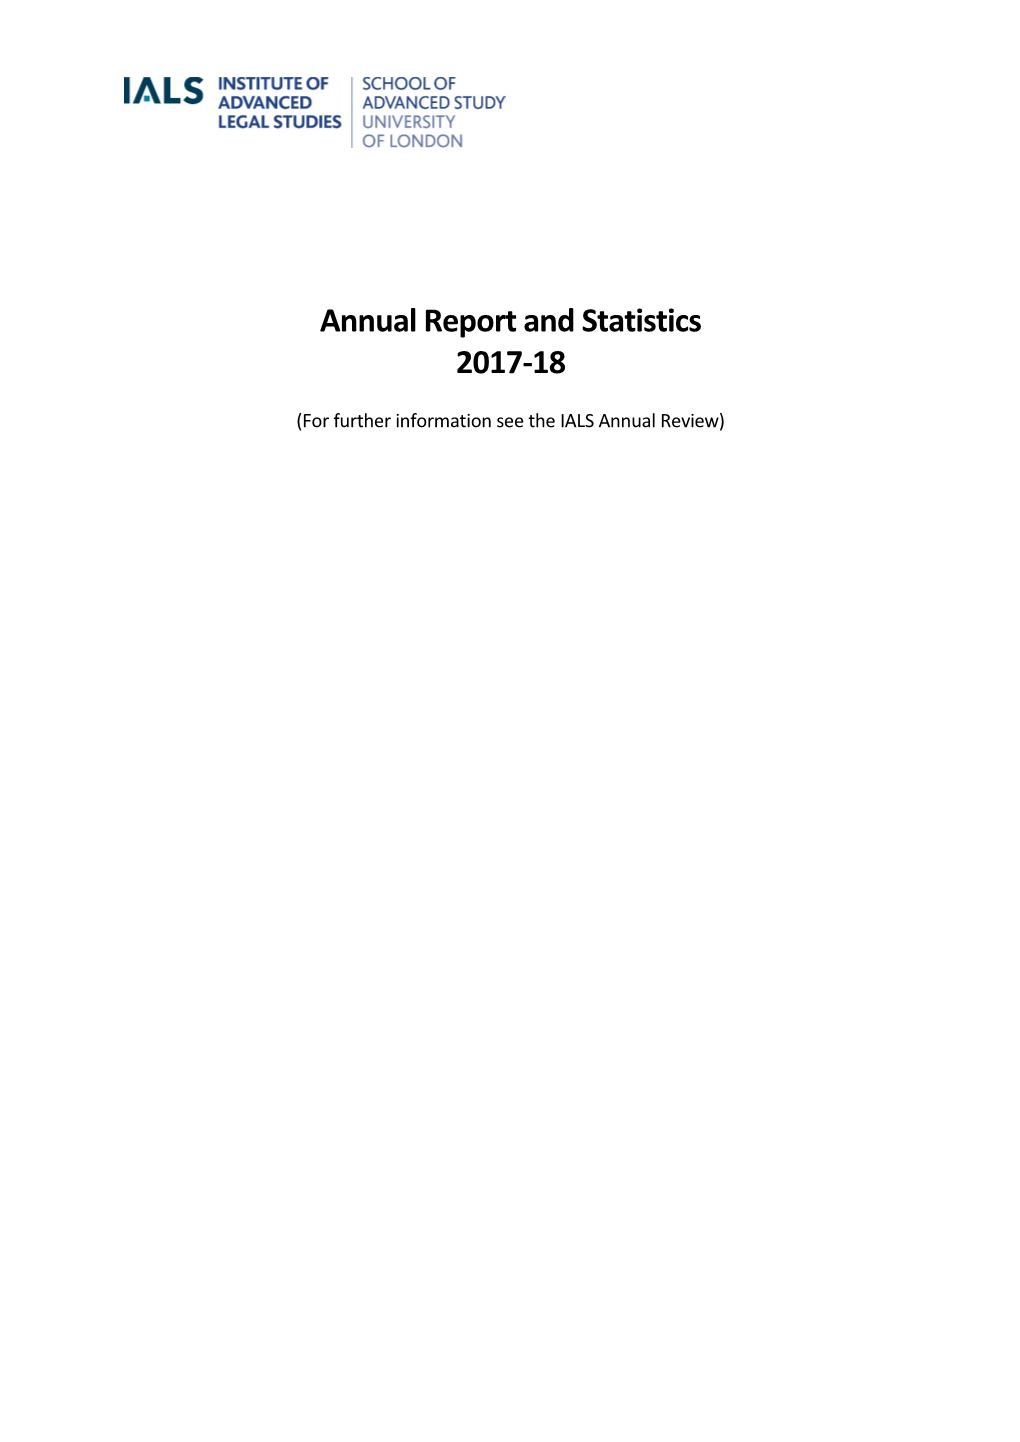 Annual Report and Statistics 2017-18